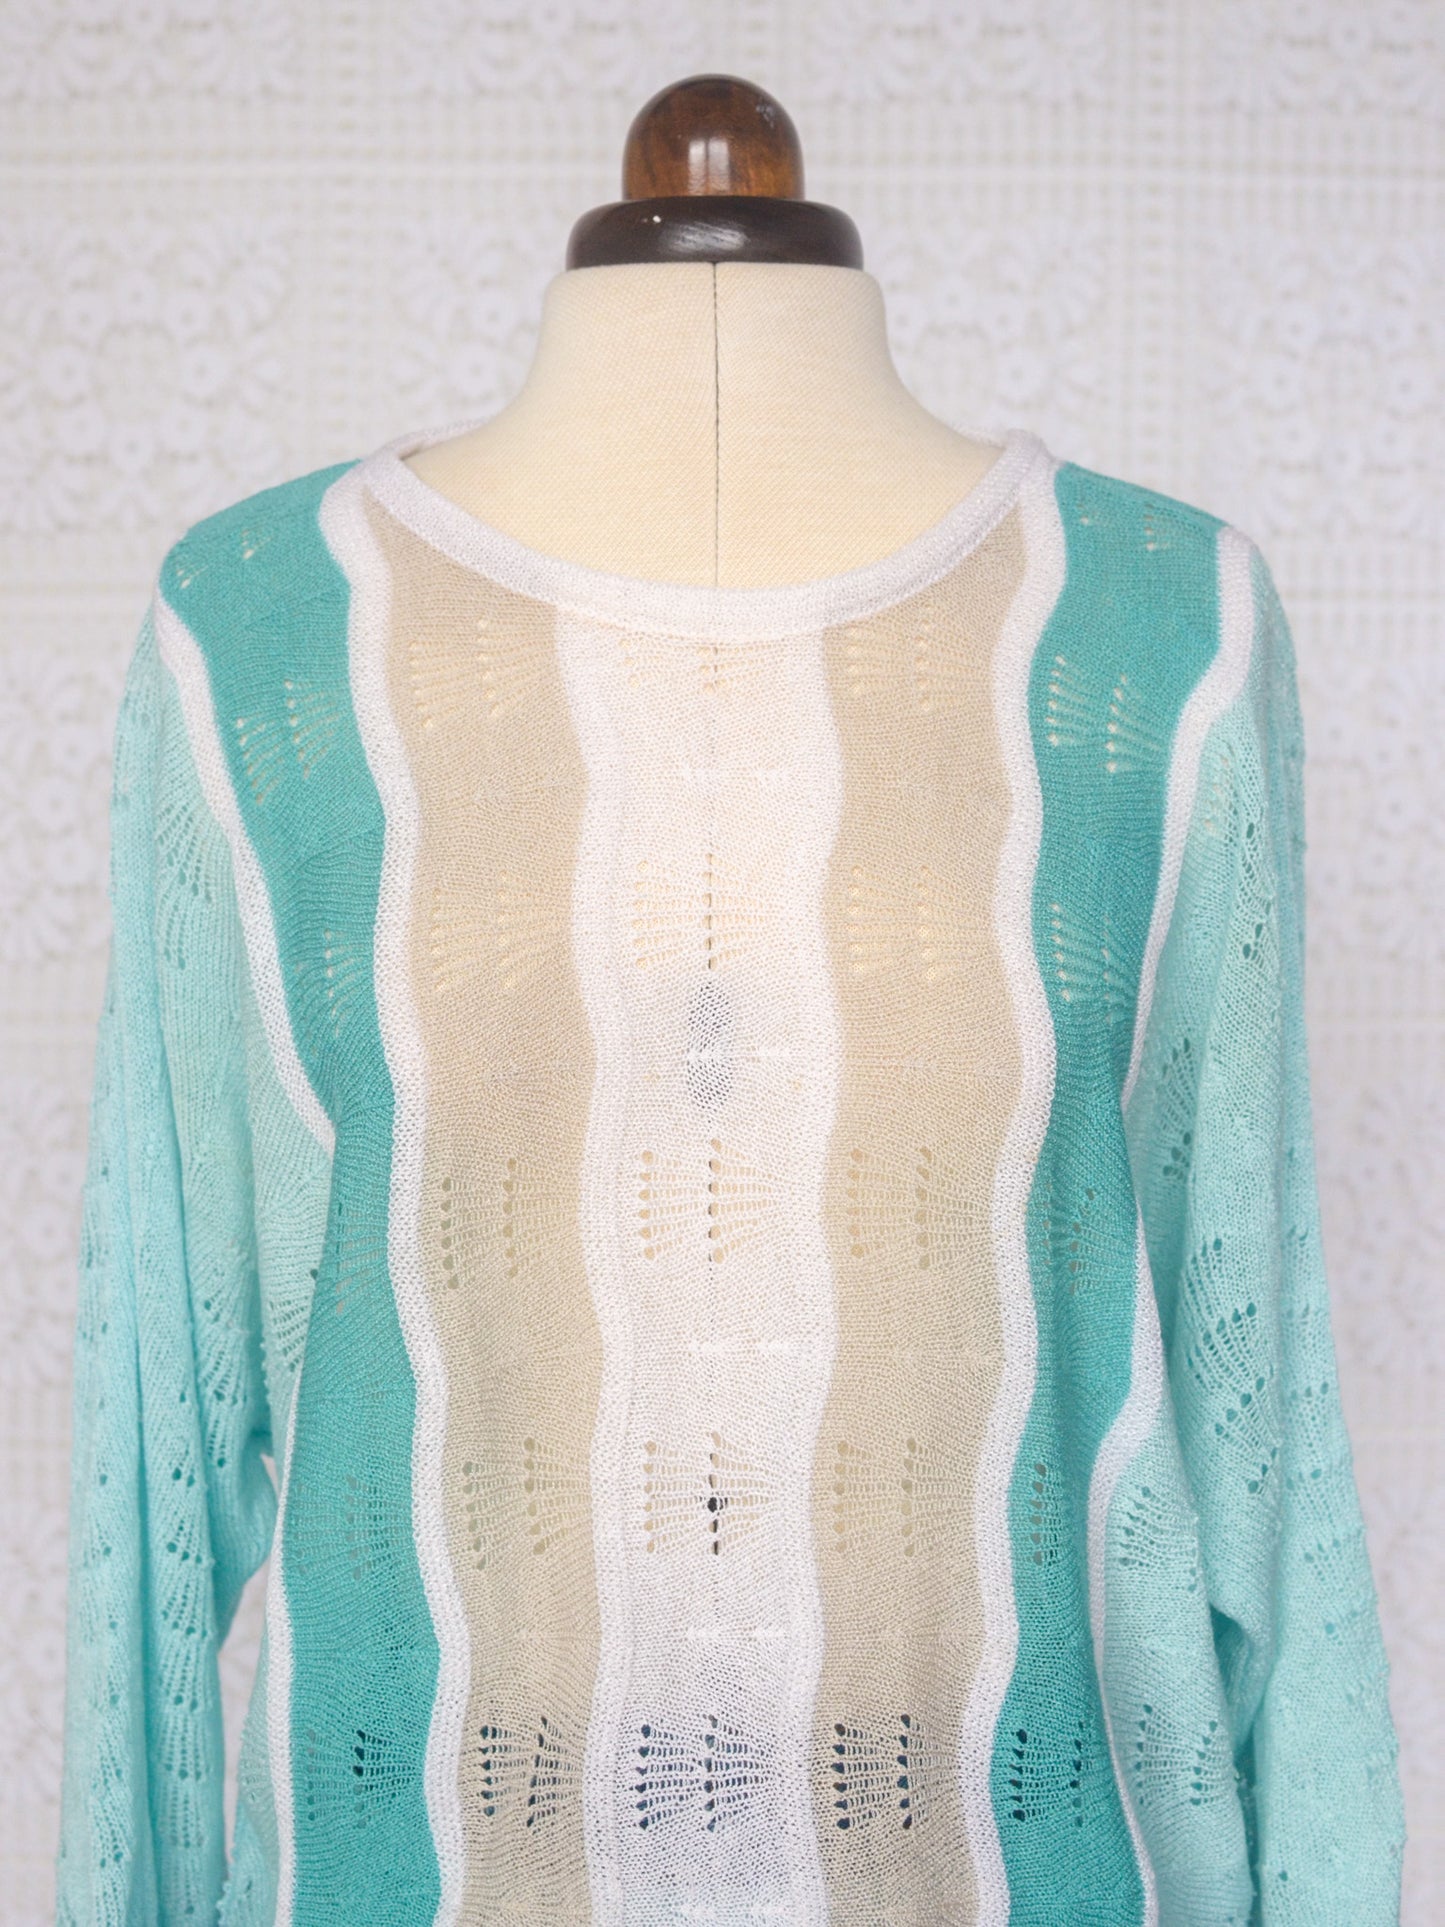 1980s turquoise lace knit batwing jumper